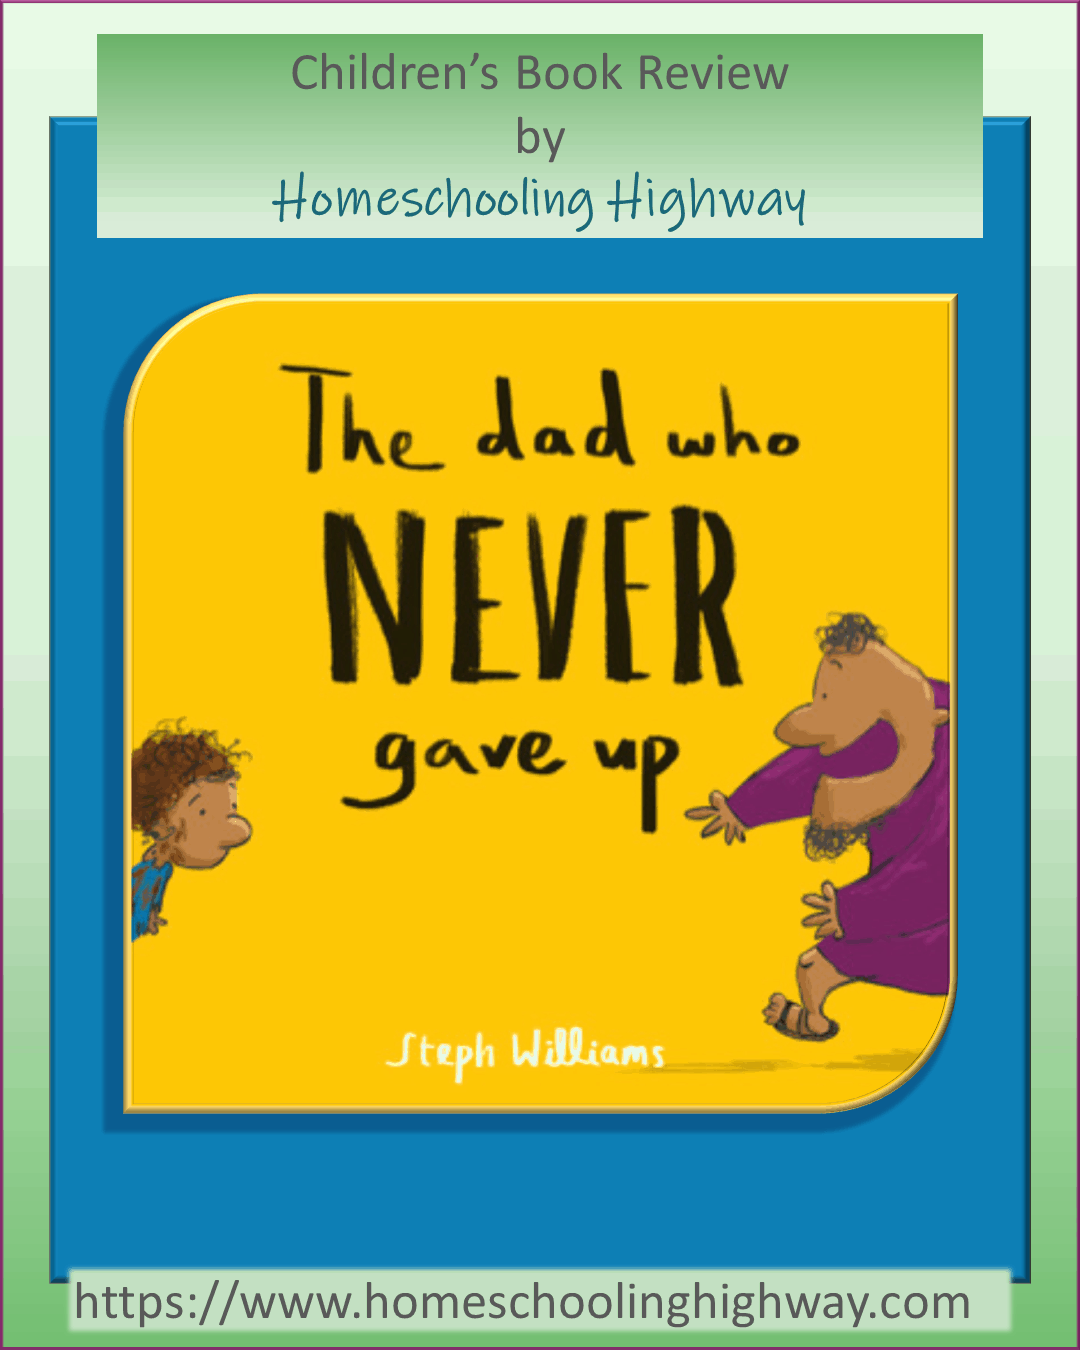 The Dad Who Never Gave Up: A Children's Book Review by Homeschooling Highway